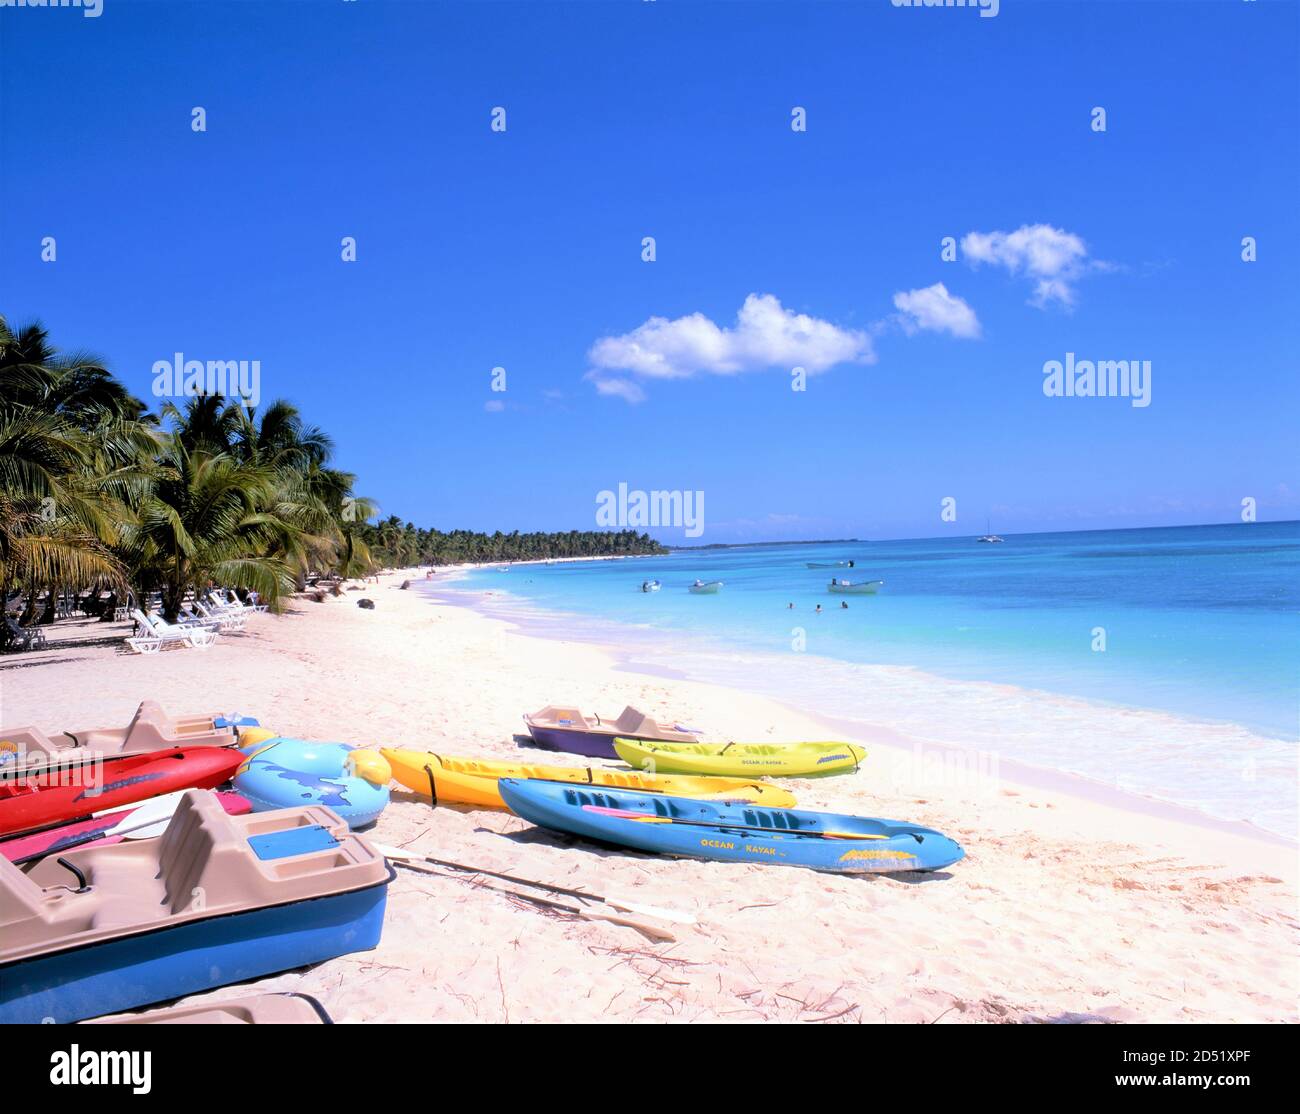 Boats on tropical beach Dominican Republic Stock Photo